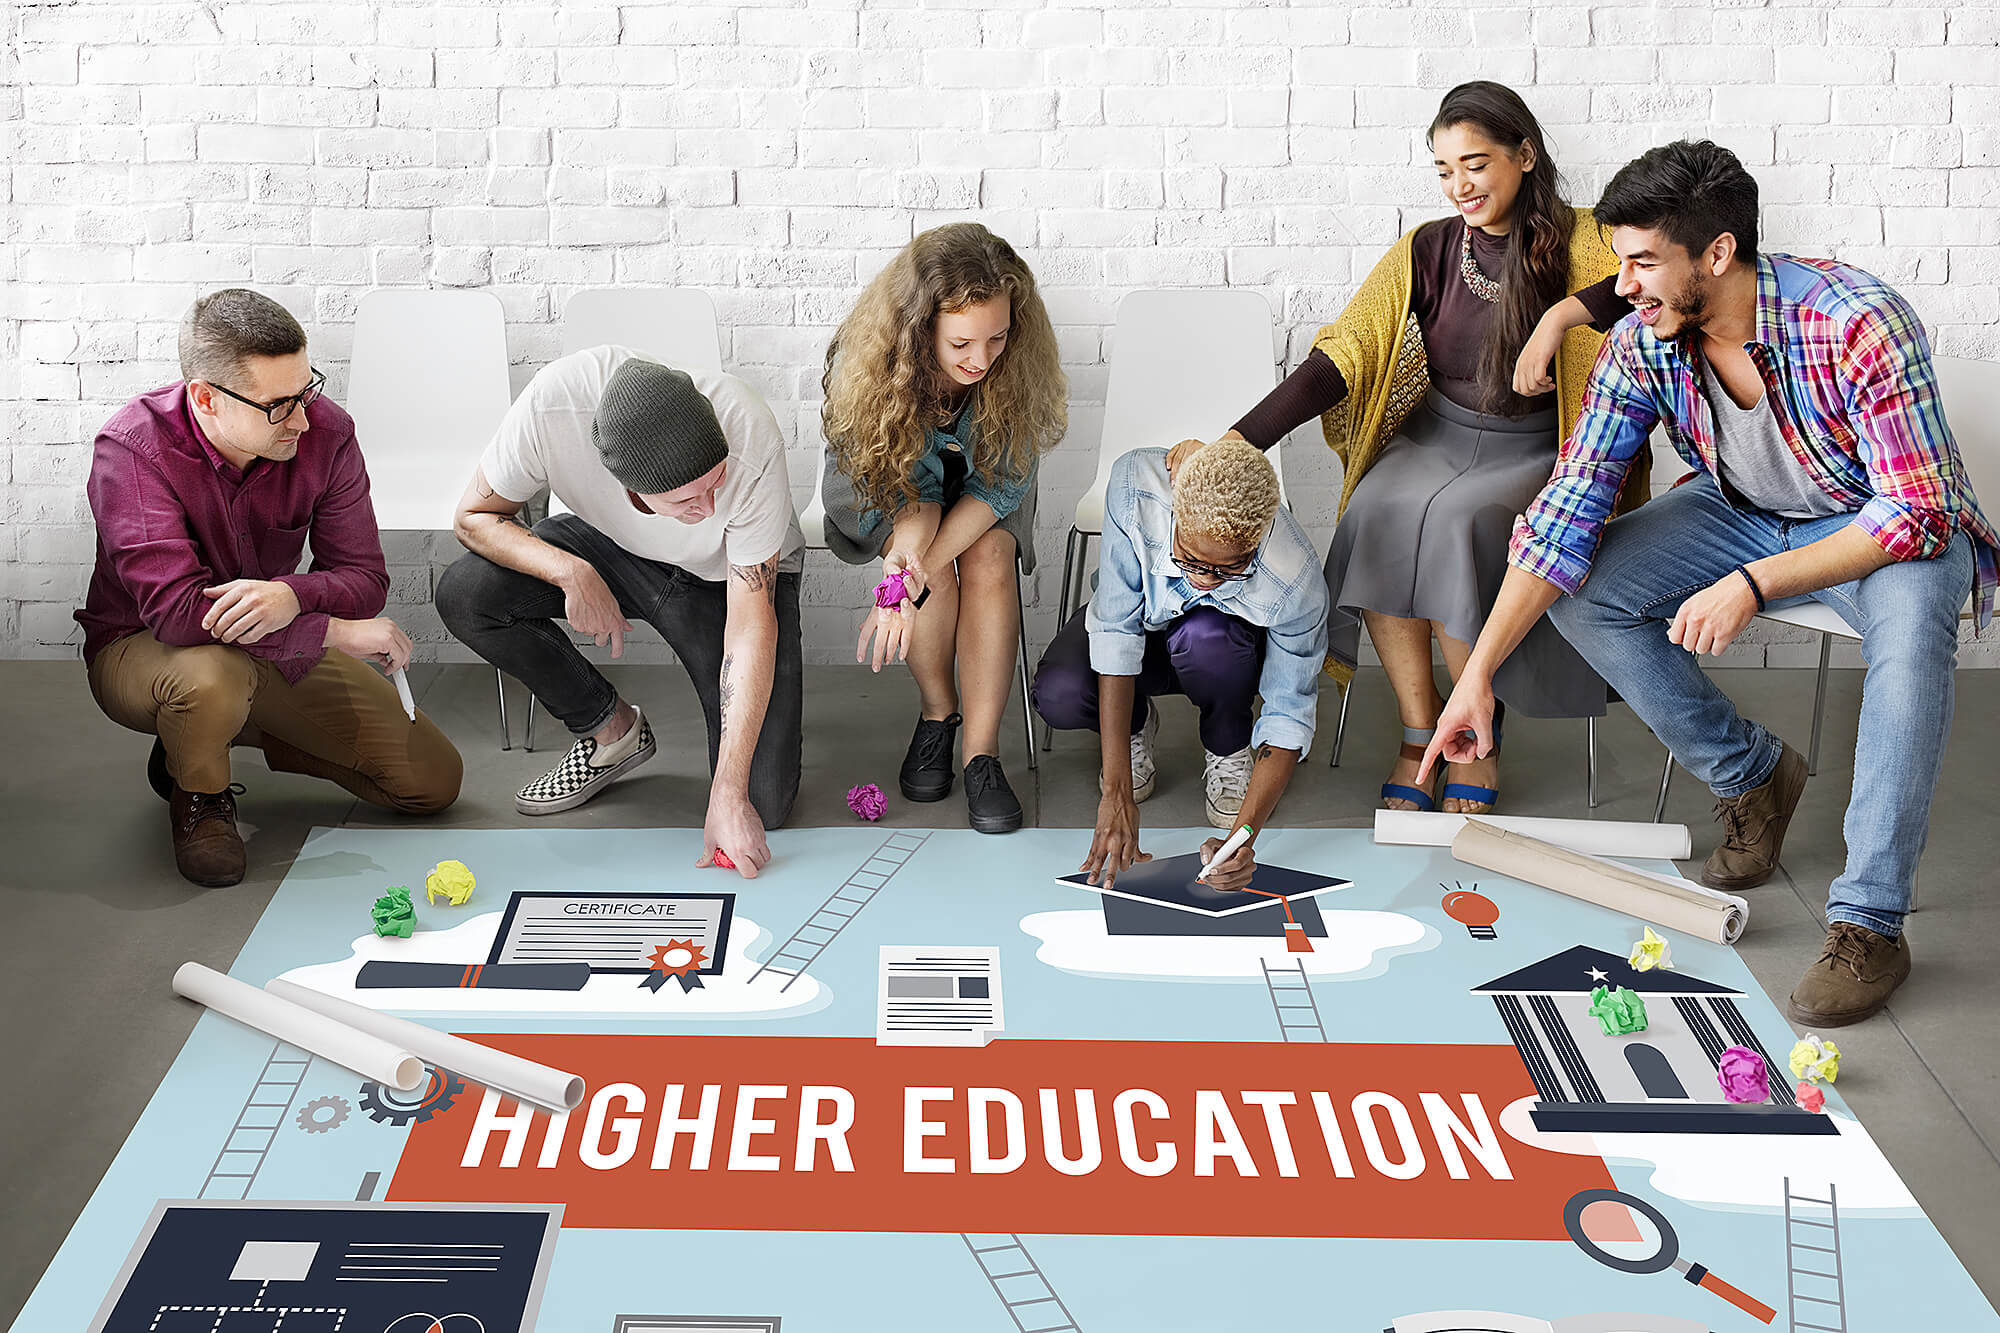 Photo of a group of students looking at a plan for higher education.